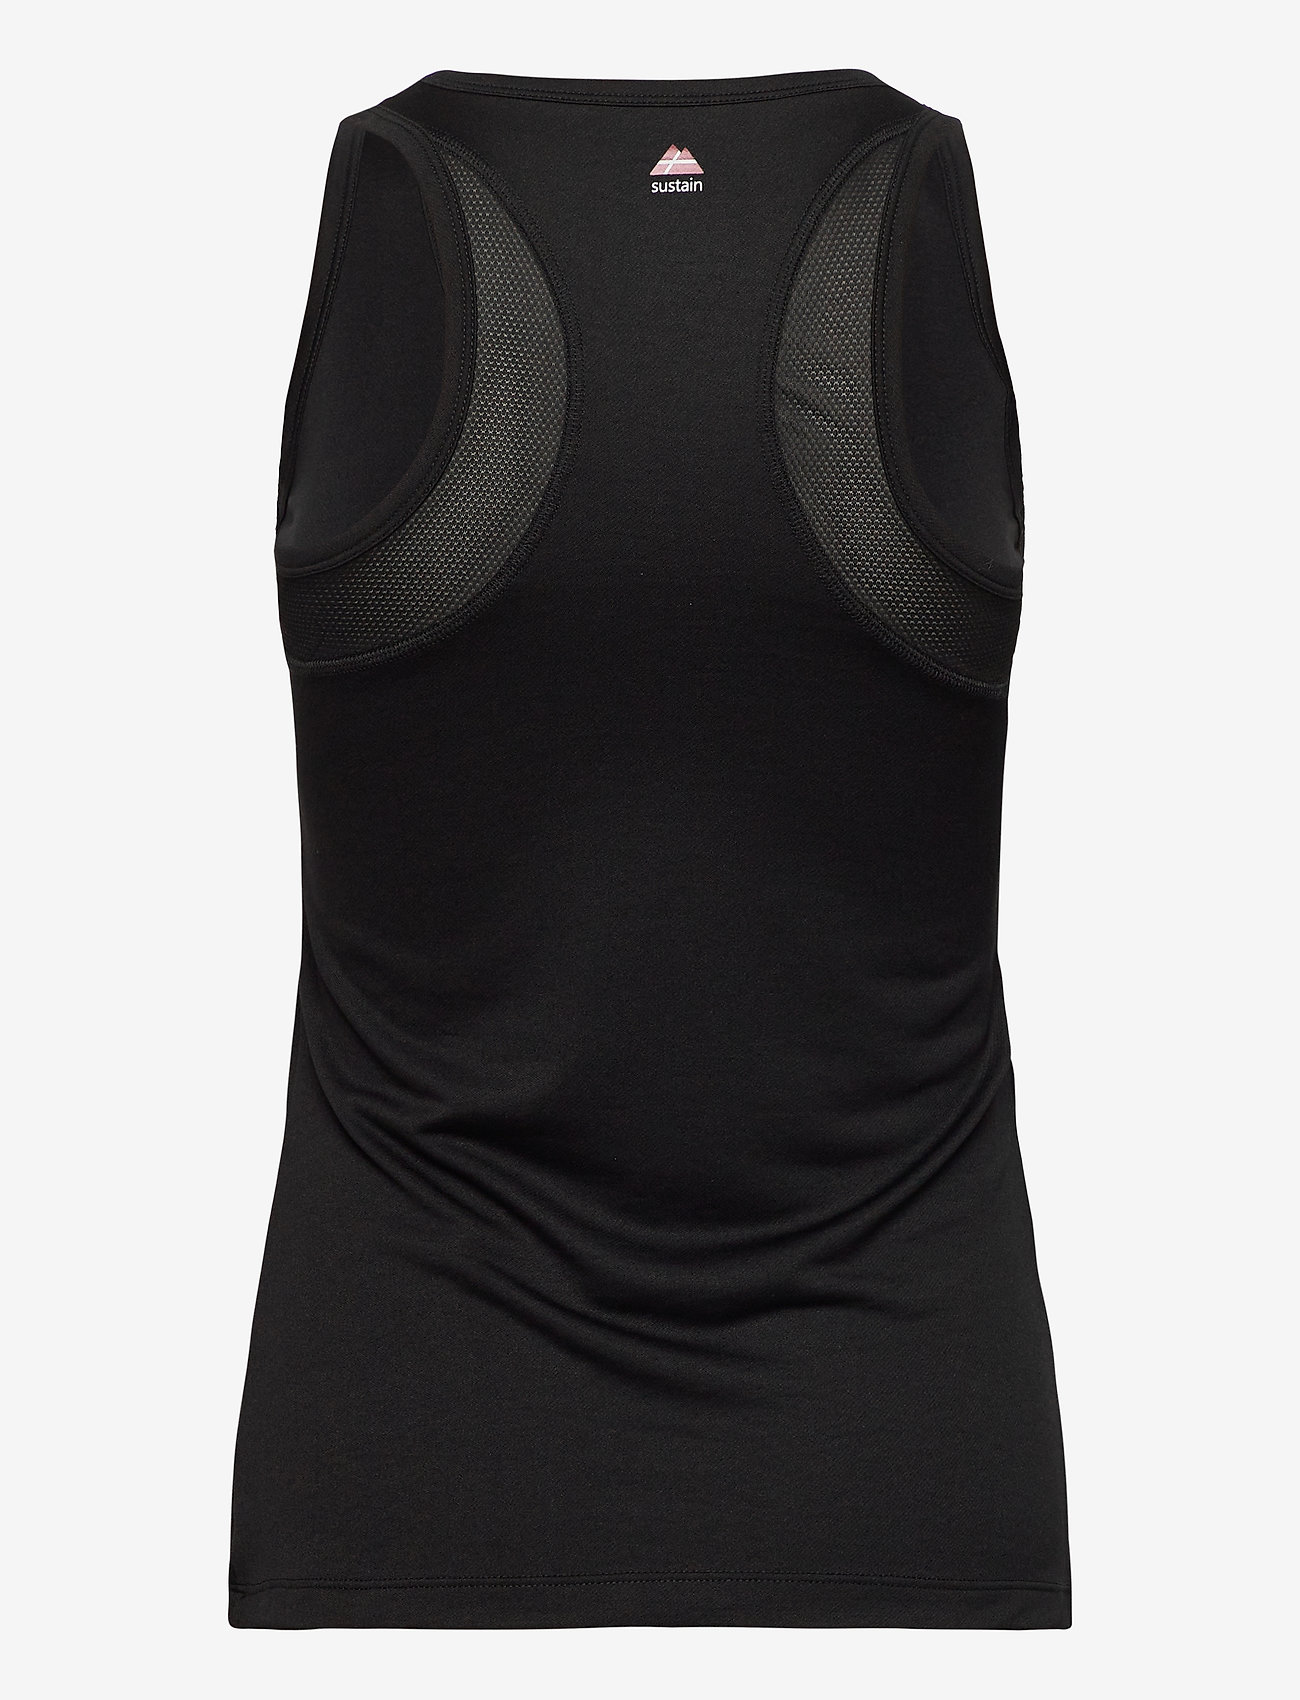 Danish Endurance - Women's Sustain Fitness Tank Top 1-pack - lowest prices - black - 1